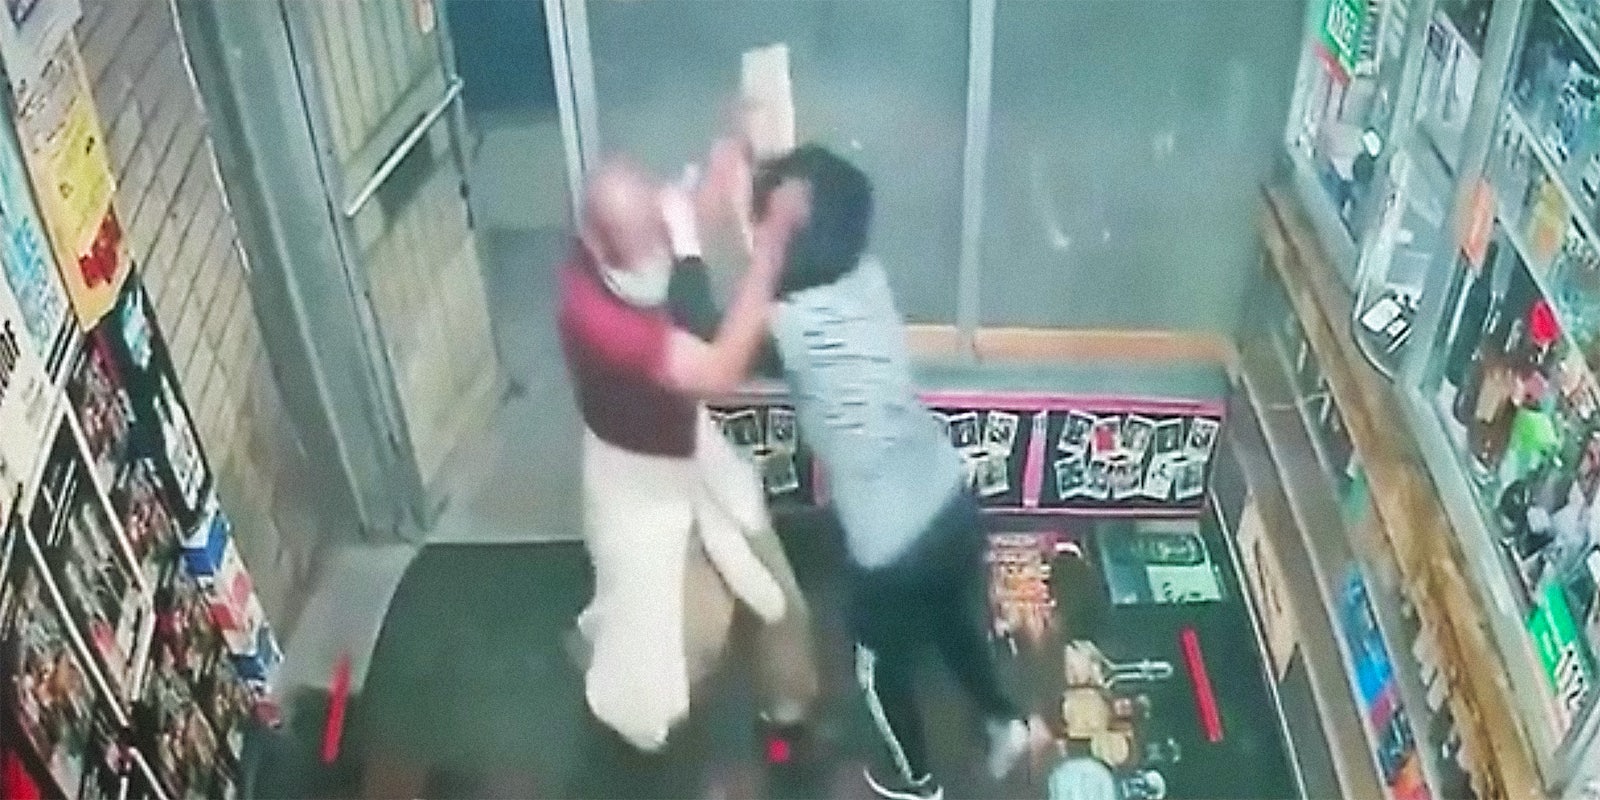 A man attacking a woman with a cement block.